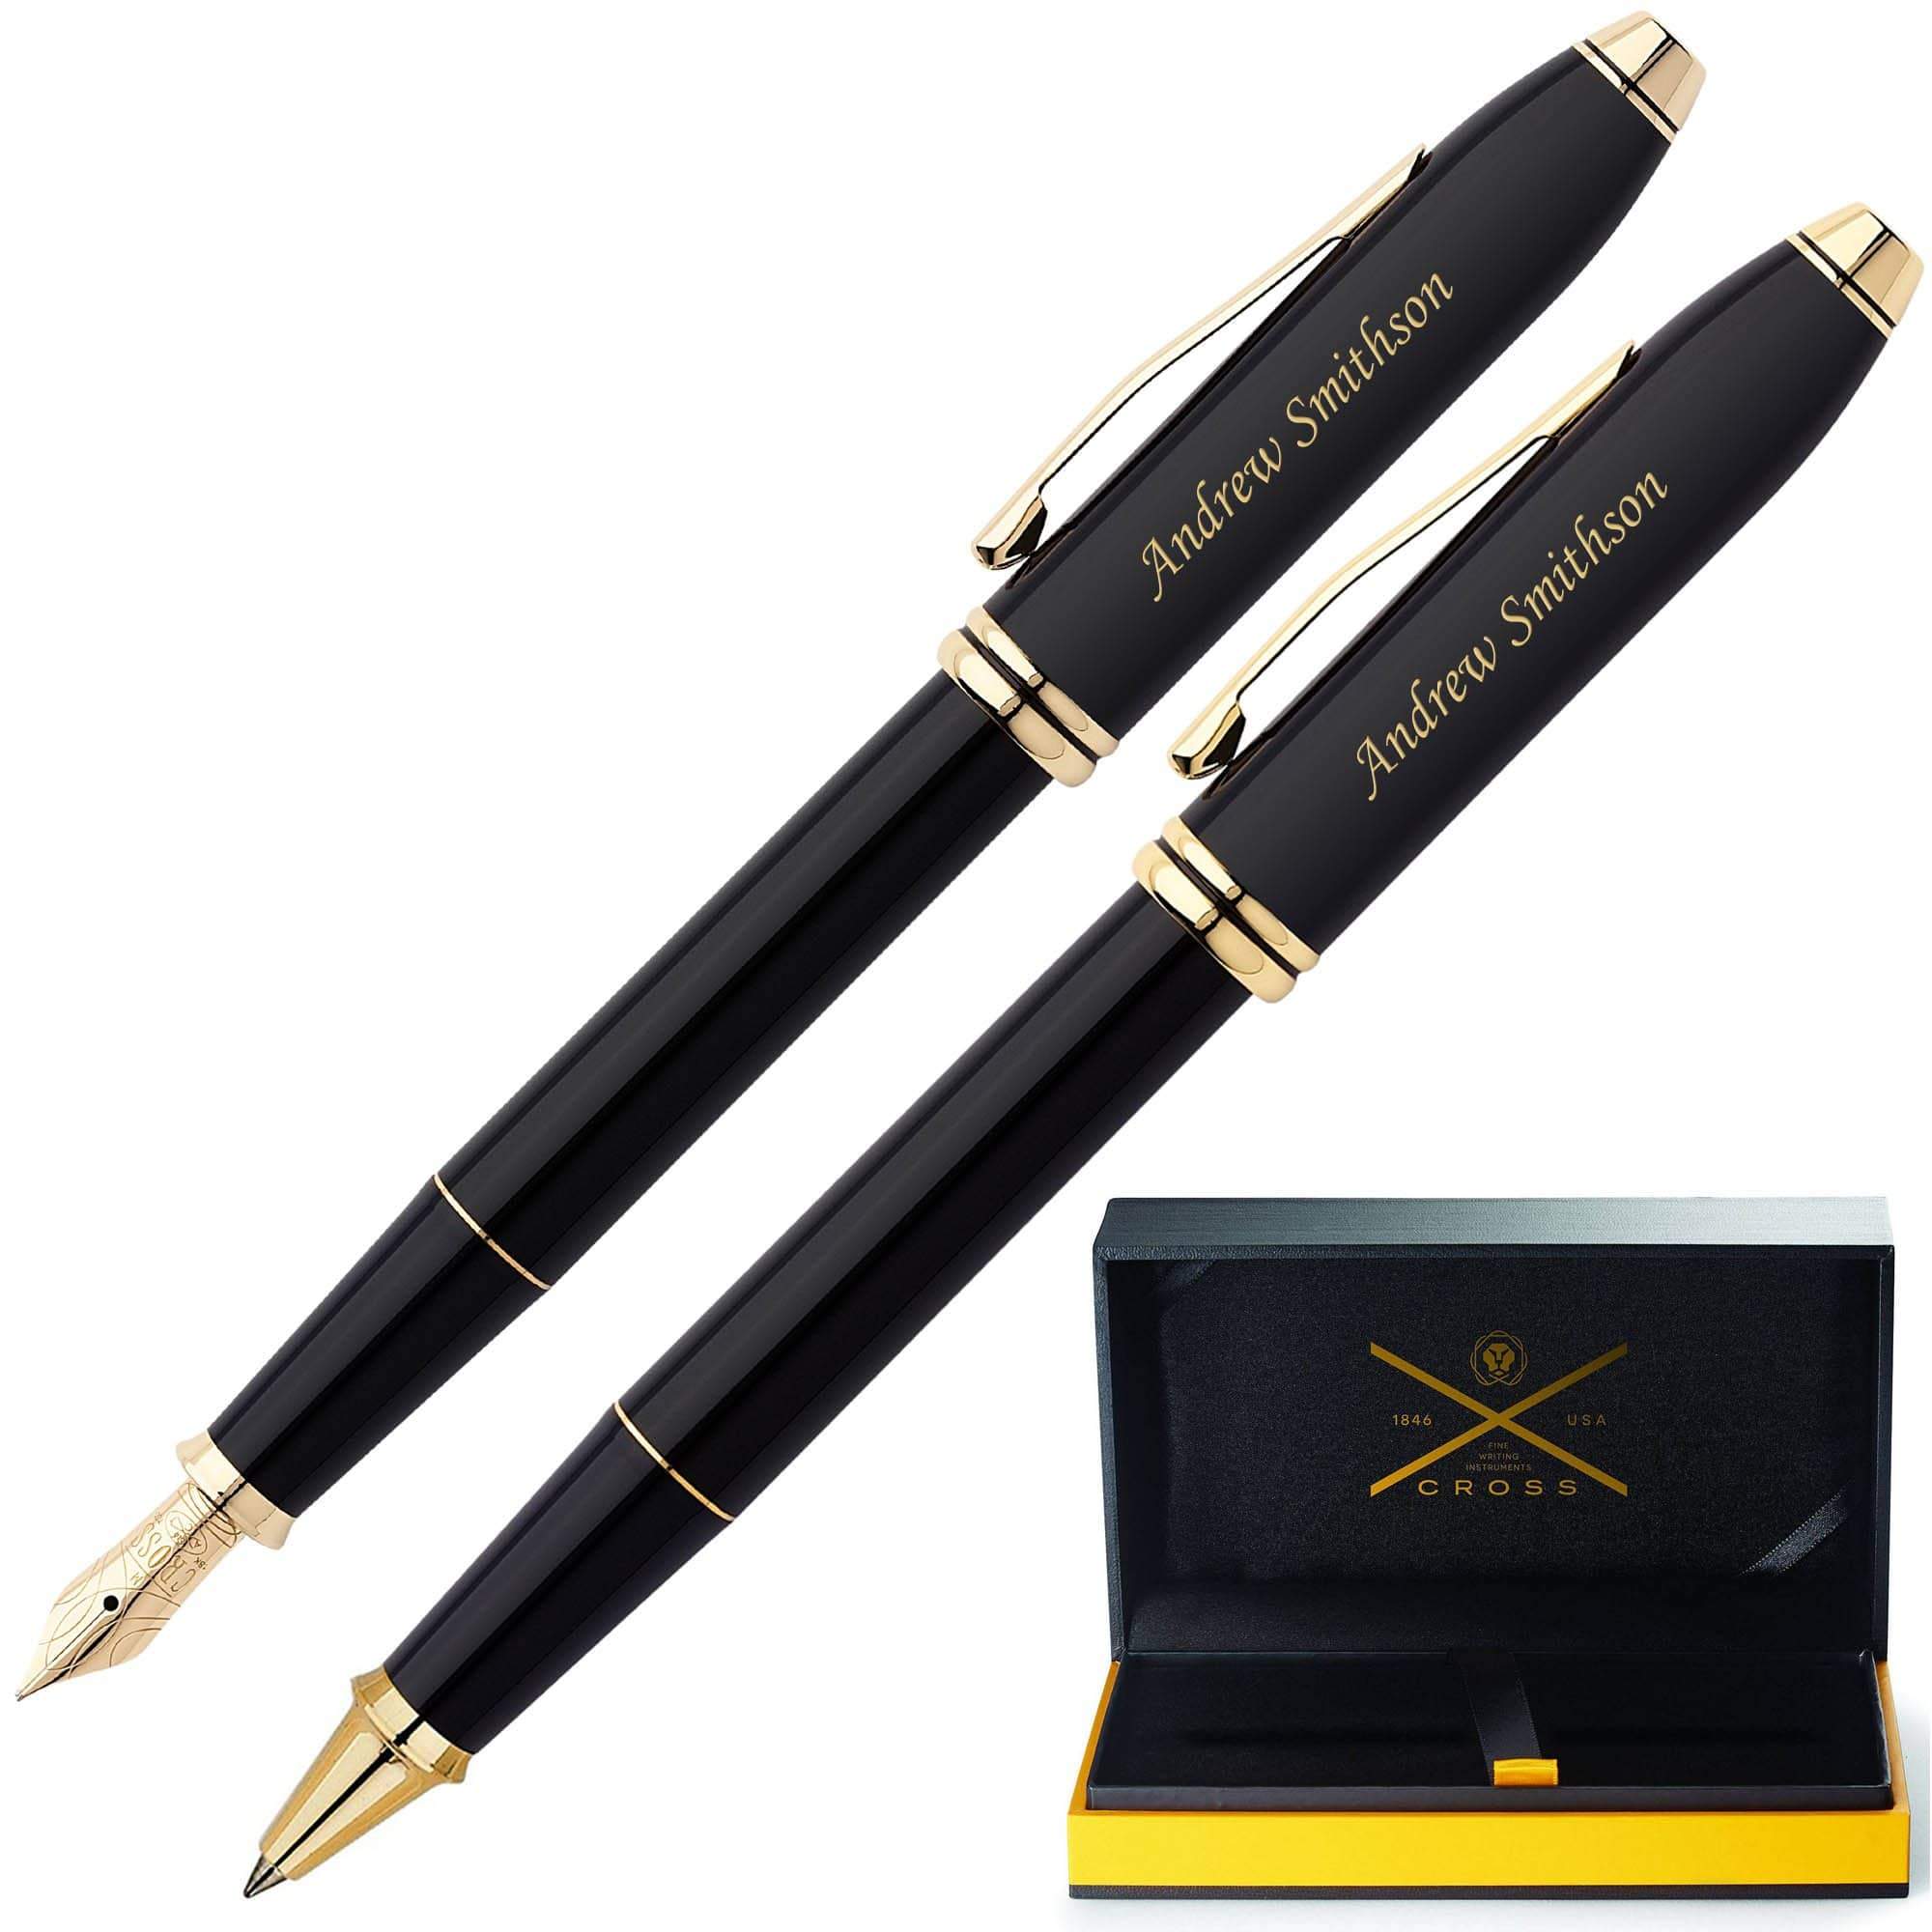 Cross Townsend Fountain Pen, Rhodium-Plated Appointments, Two-tone 18 Carat  Gold and Rhodium-Plated Fine Nib Black